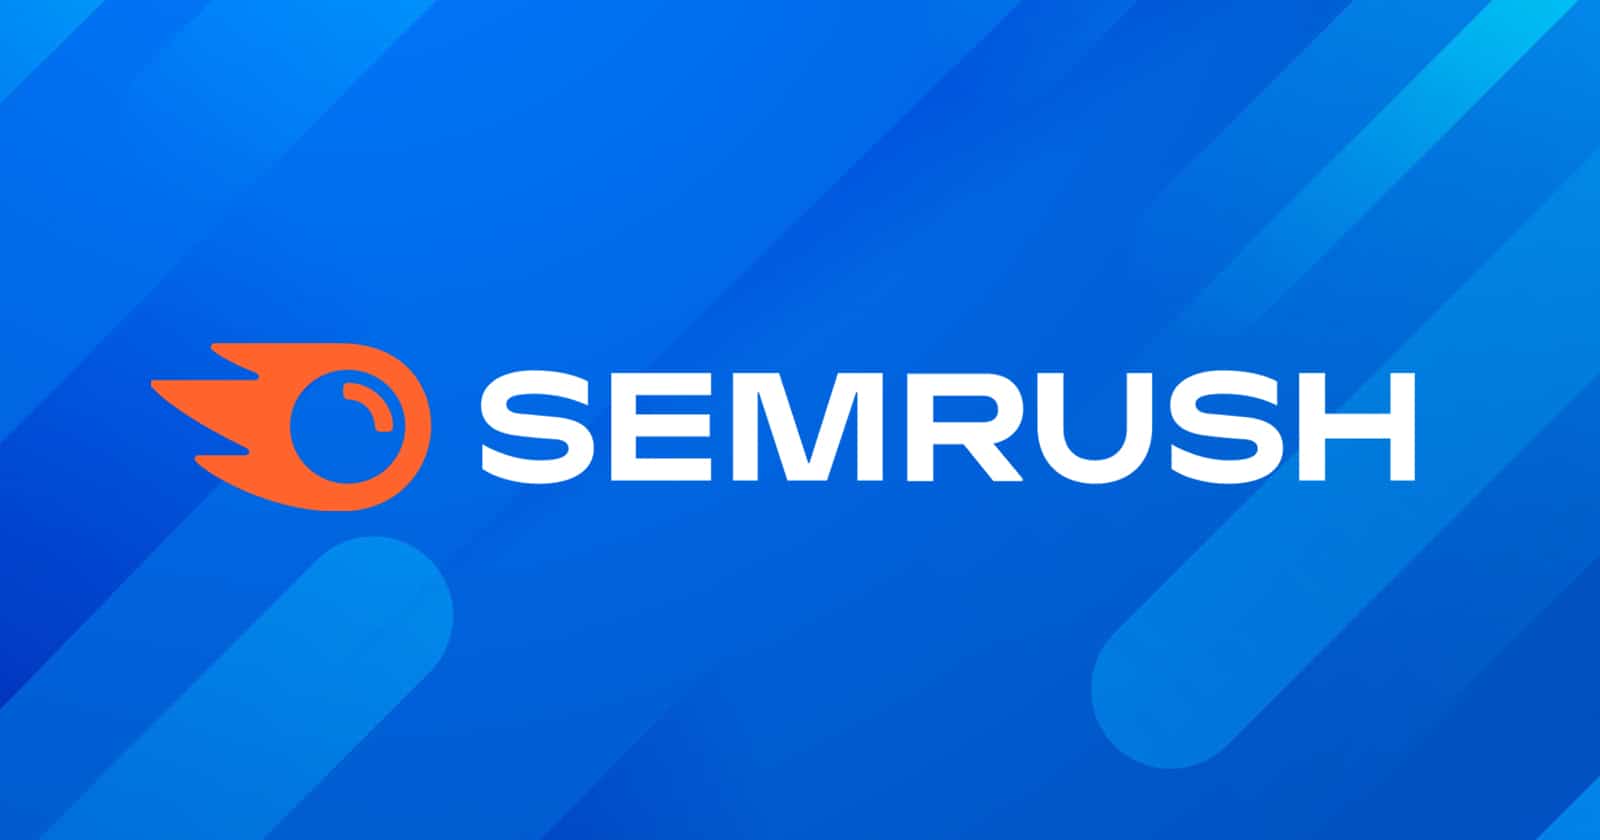 What is SEMRush - An Introductory Guide to SEMRush - PageTraffic